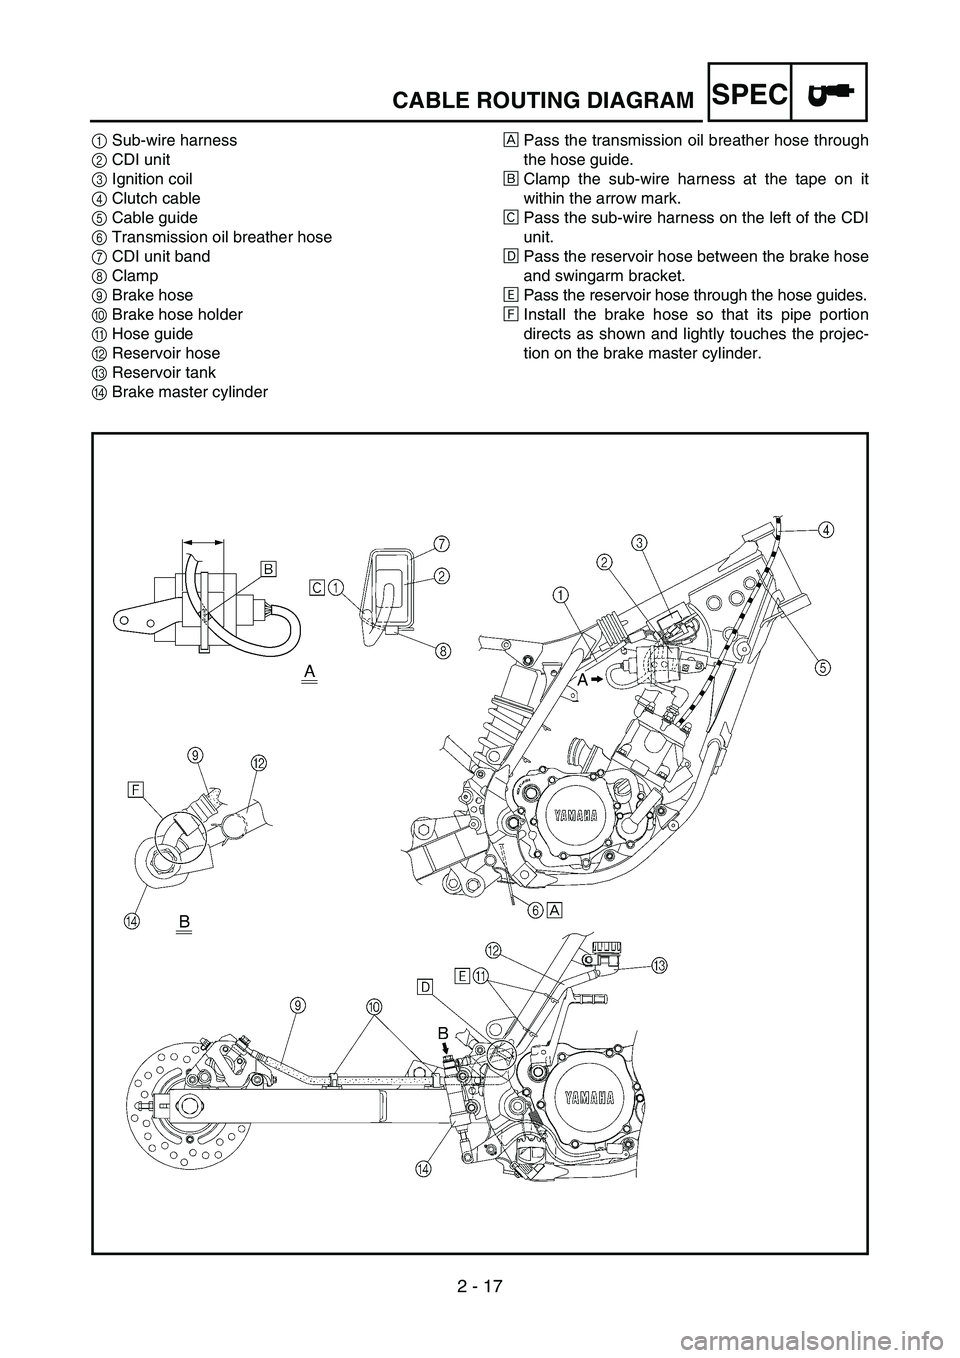 YAMAHA YZ85 2003  Betriebsanleitungen (in German) 2 - 17
SPEC
1Sub-wire harness
2CDI unit
3Ignition coil
4Clutch cable
5Cable guide
6Transmission oil breather hose
7CDI unit band
8Clamp
9Brake hose
0Brake hose holder
AHose guide
BReservoir hose
CRese